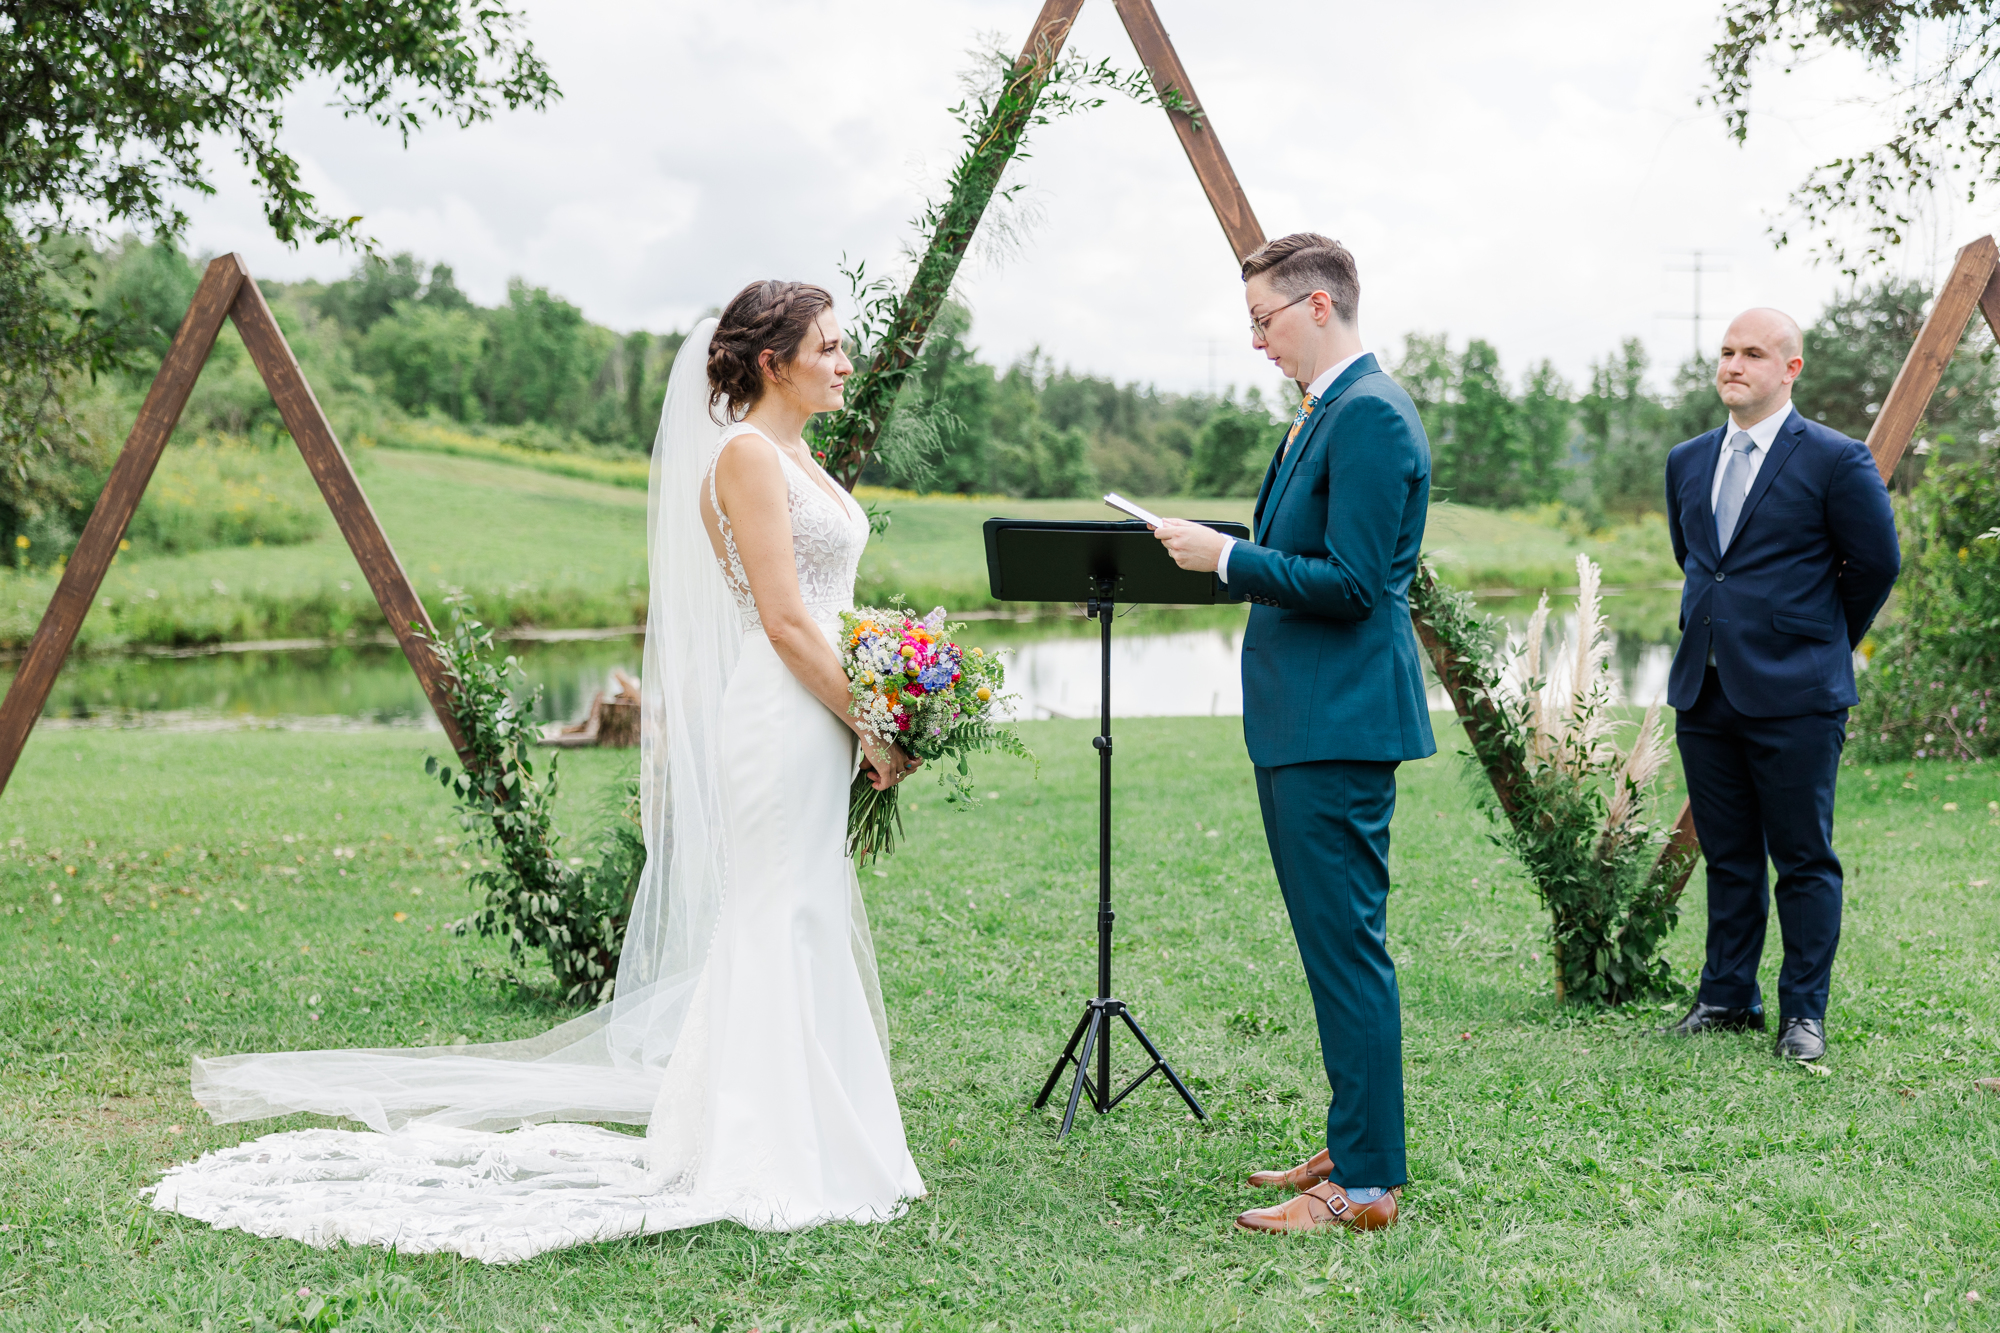 Picturesque Upstate Wedding Photos at Cristman Barn in Ilion, New York